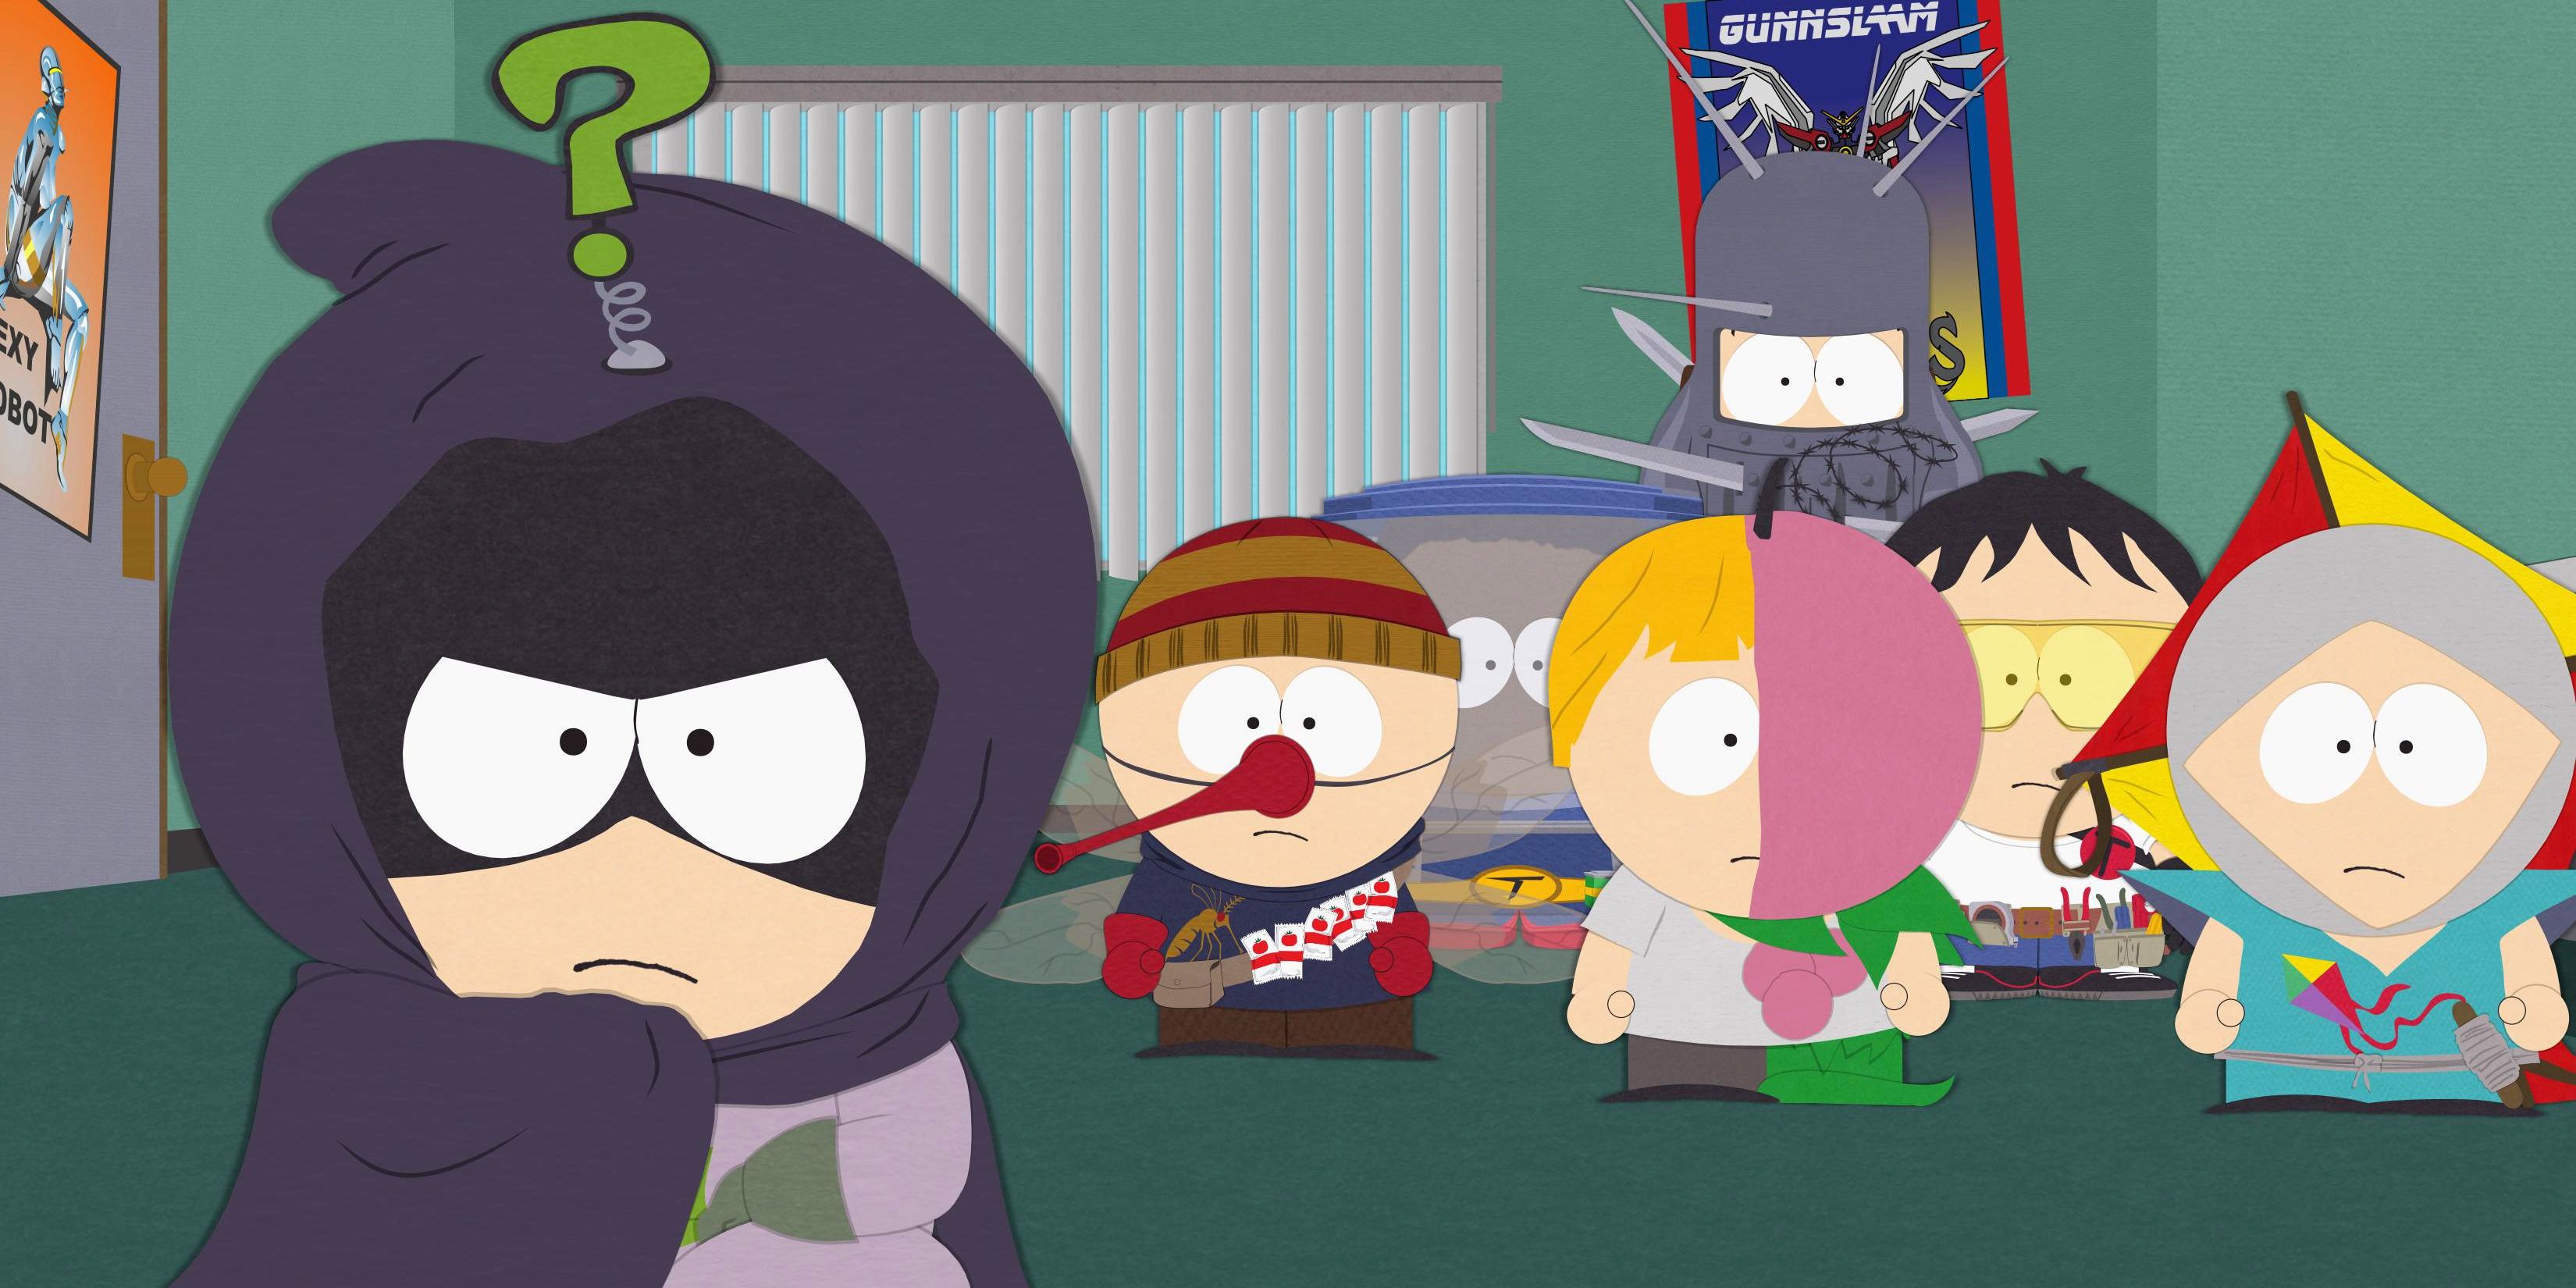 Kenny as Mysterion in South Park